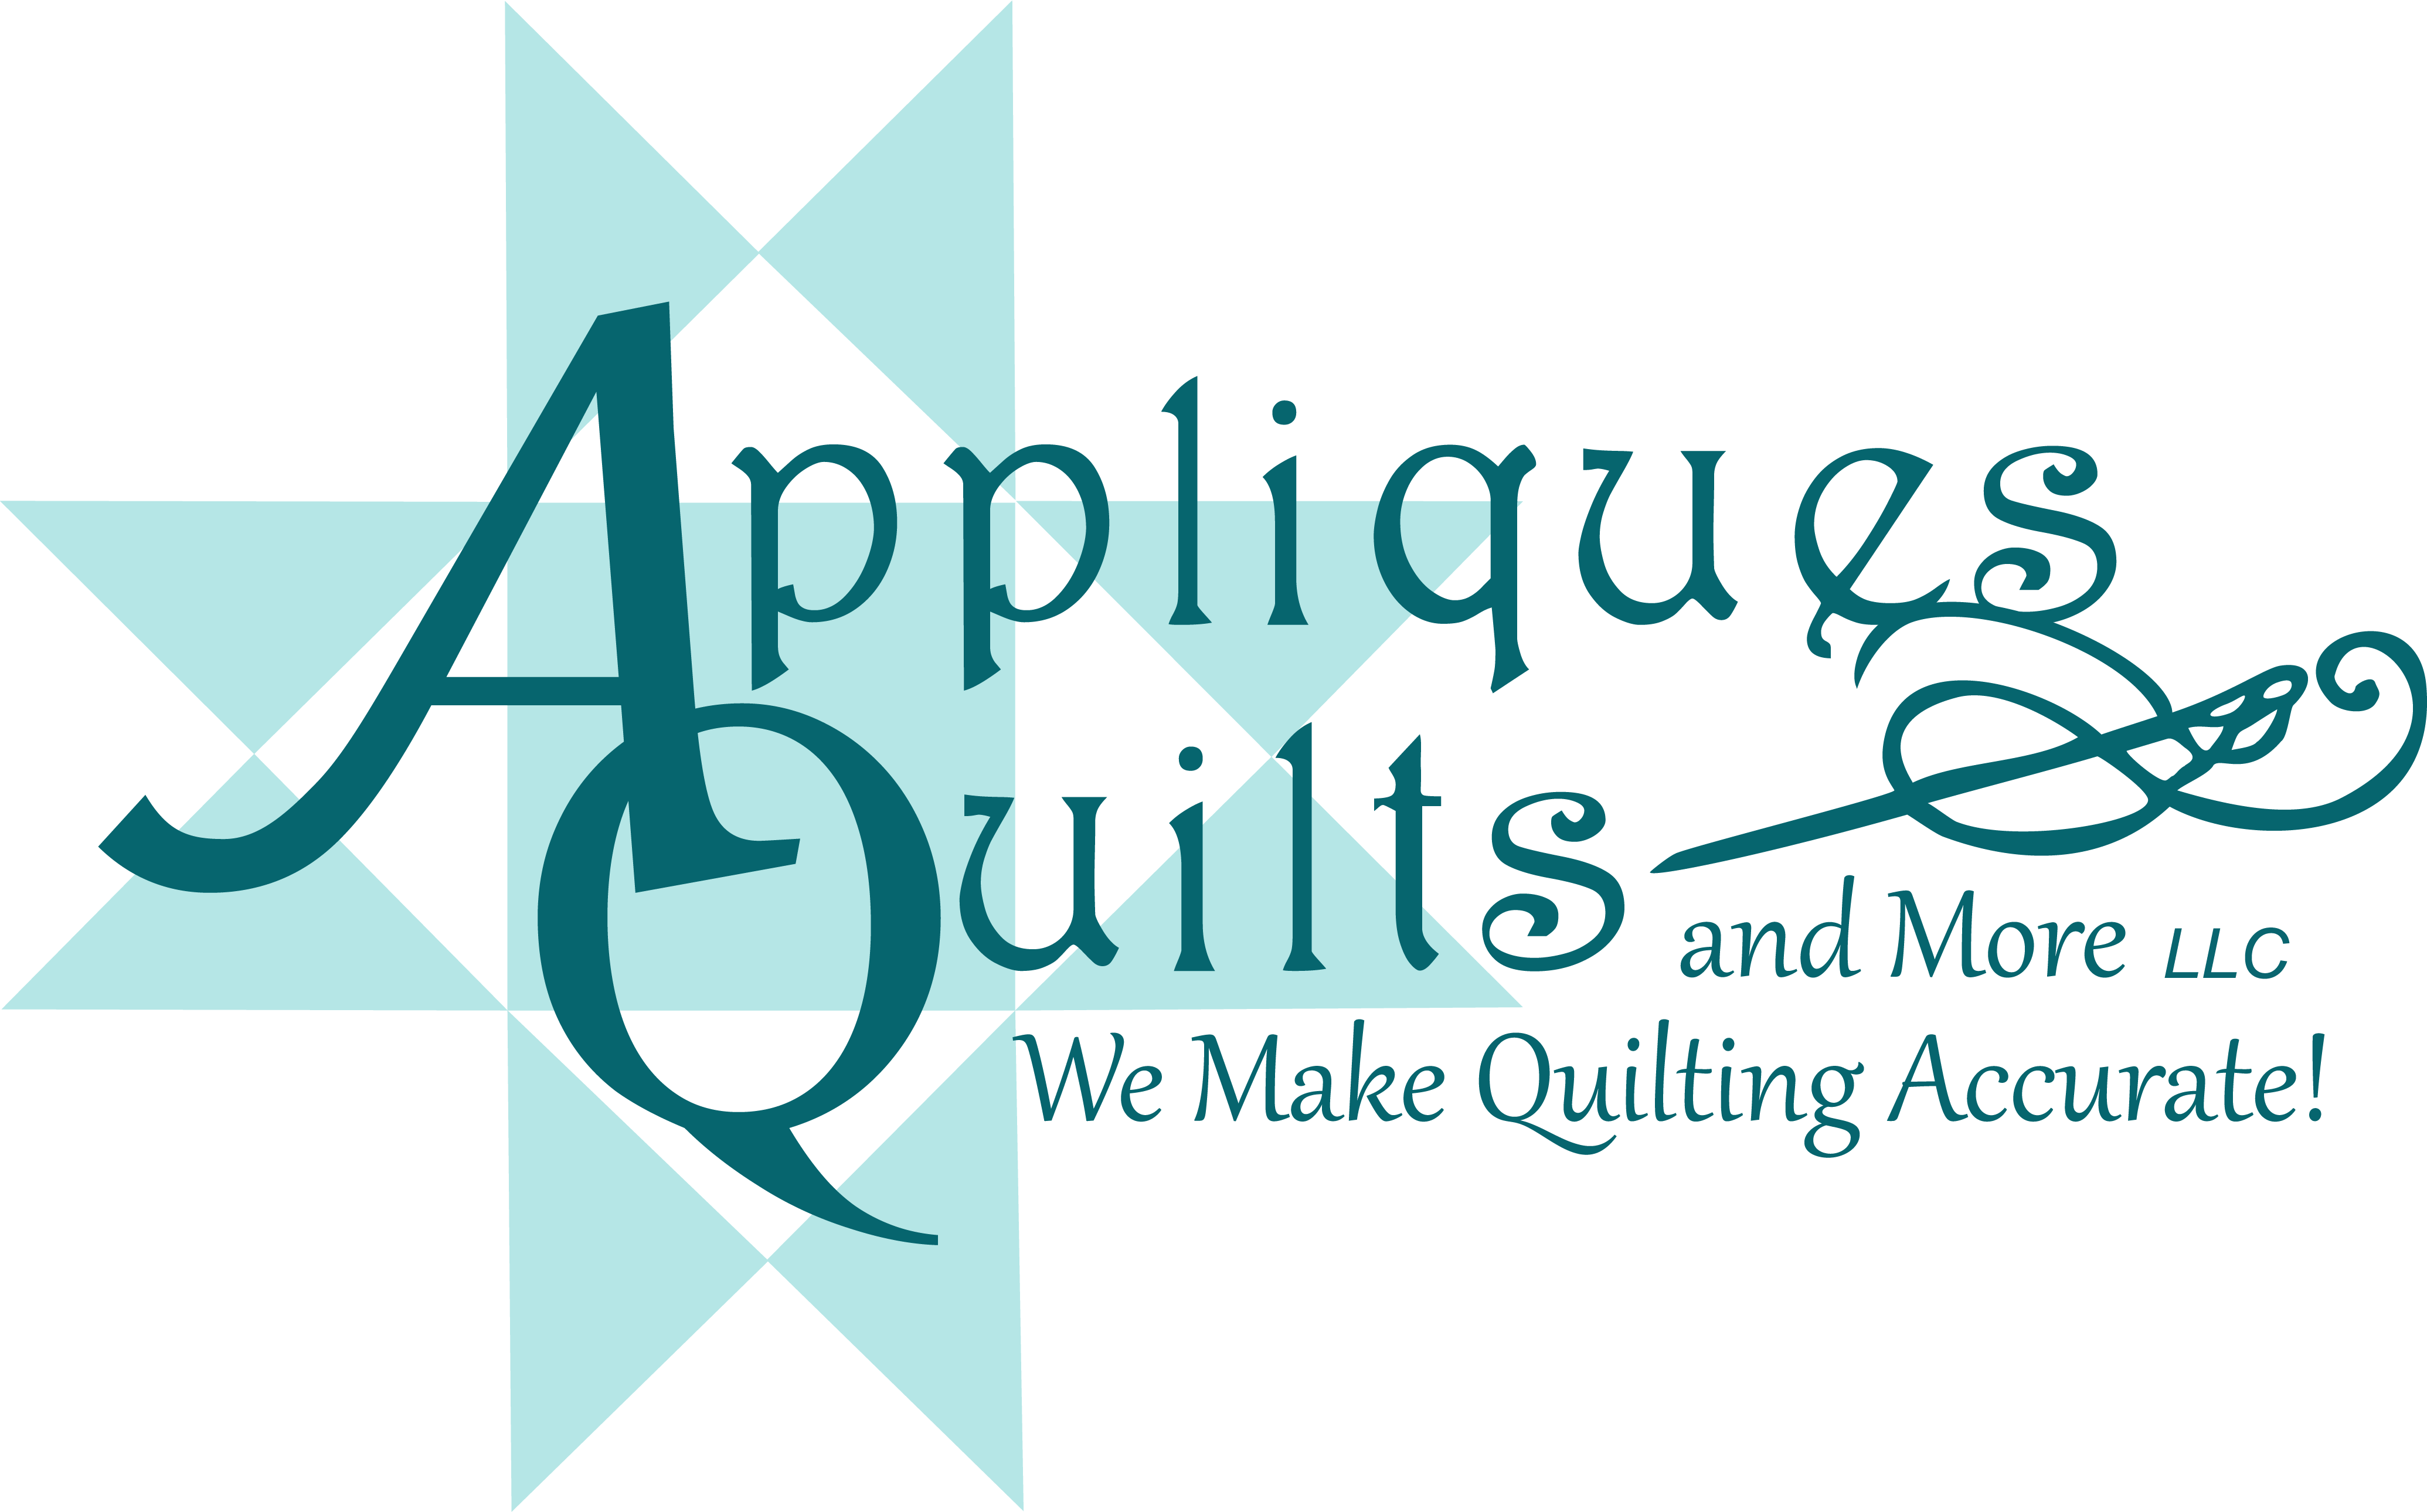 Appliques, Quilts and More